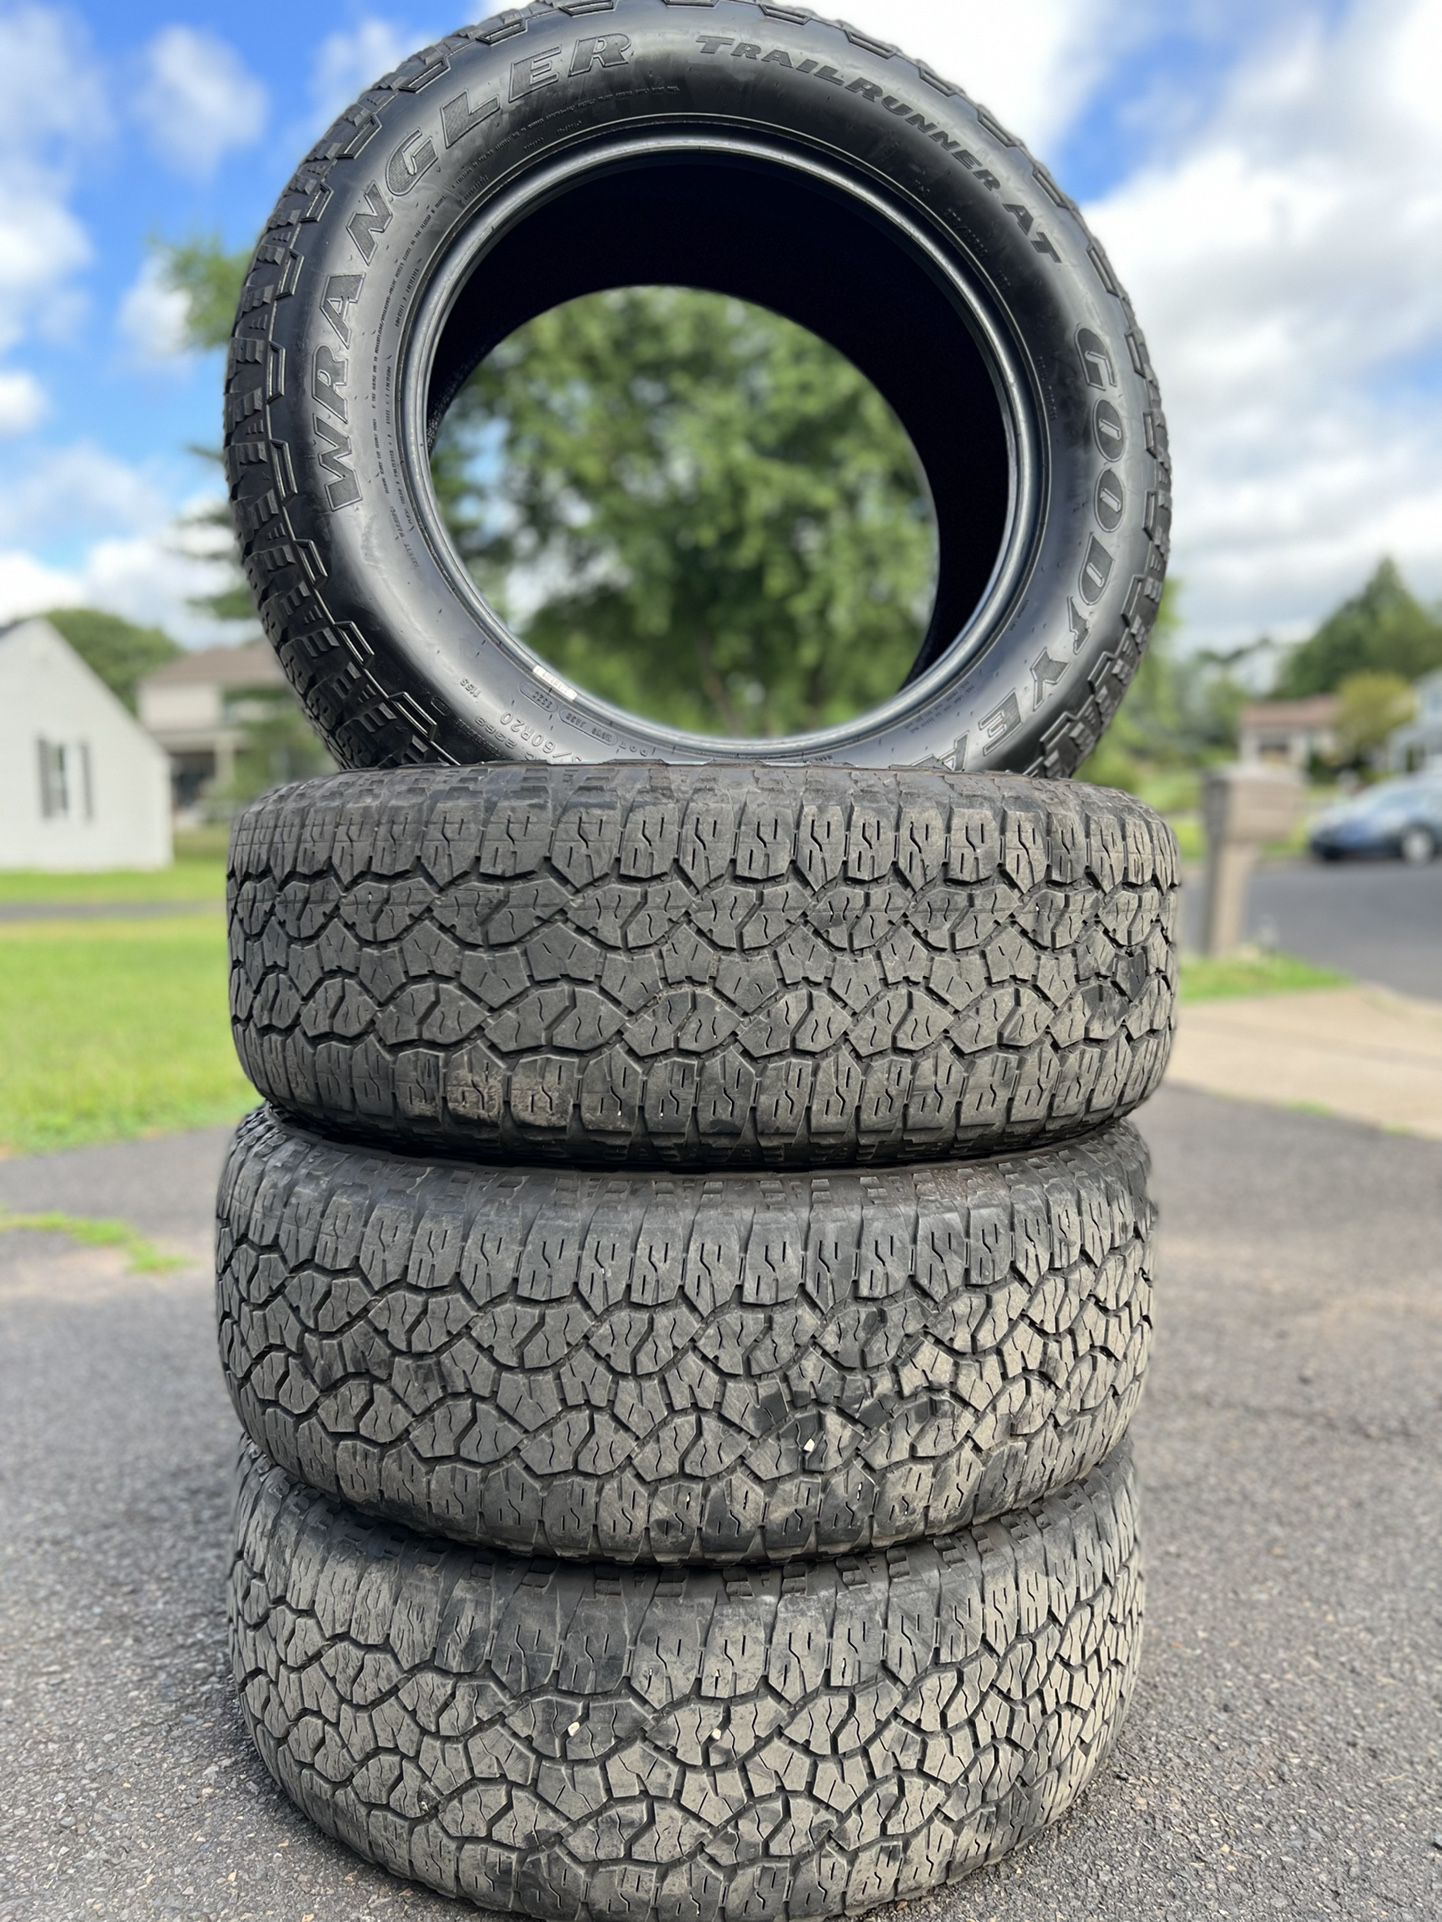 4 Tires 275/60r20 Goodyear Wrangler Trailrunner A/T for Sale in Yardley, PA  - OfferUp